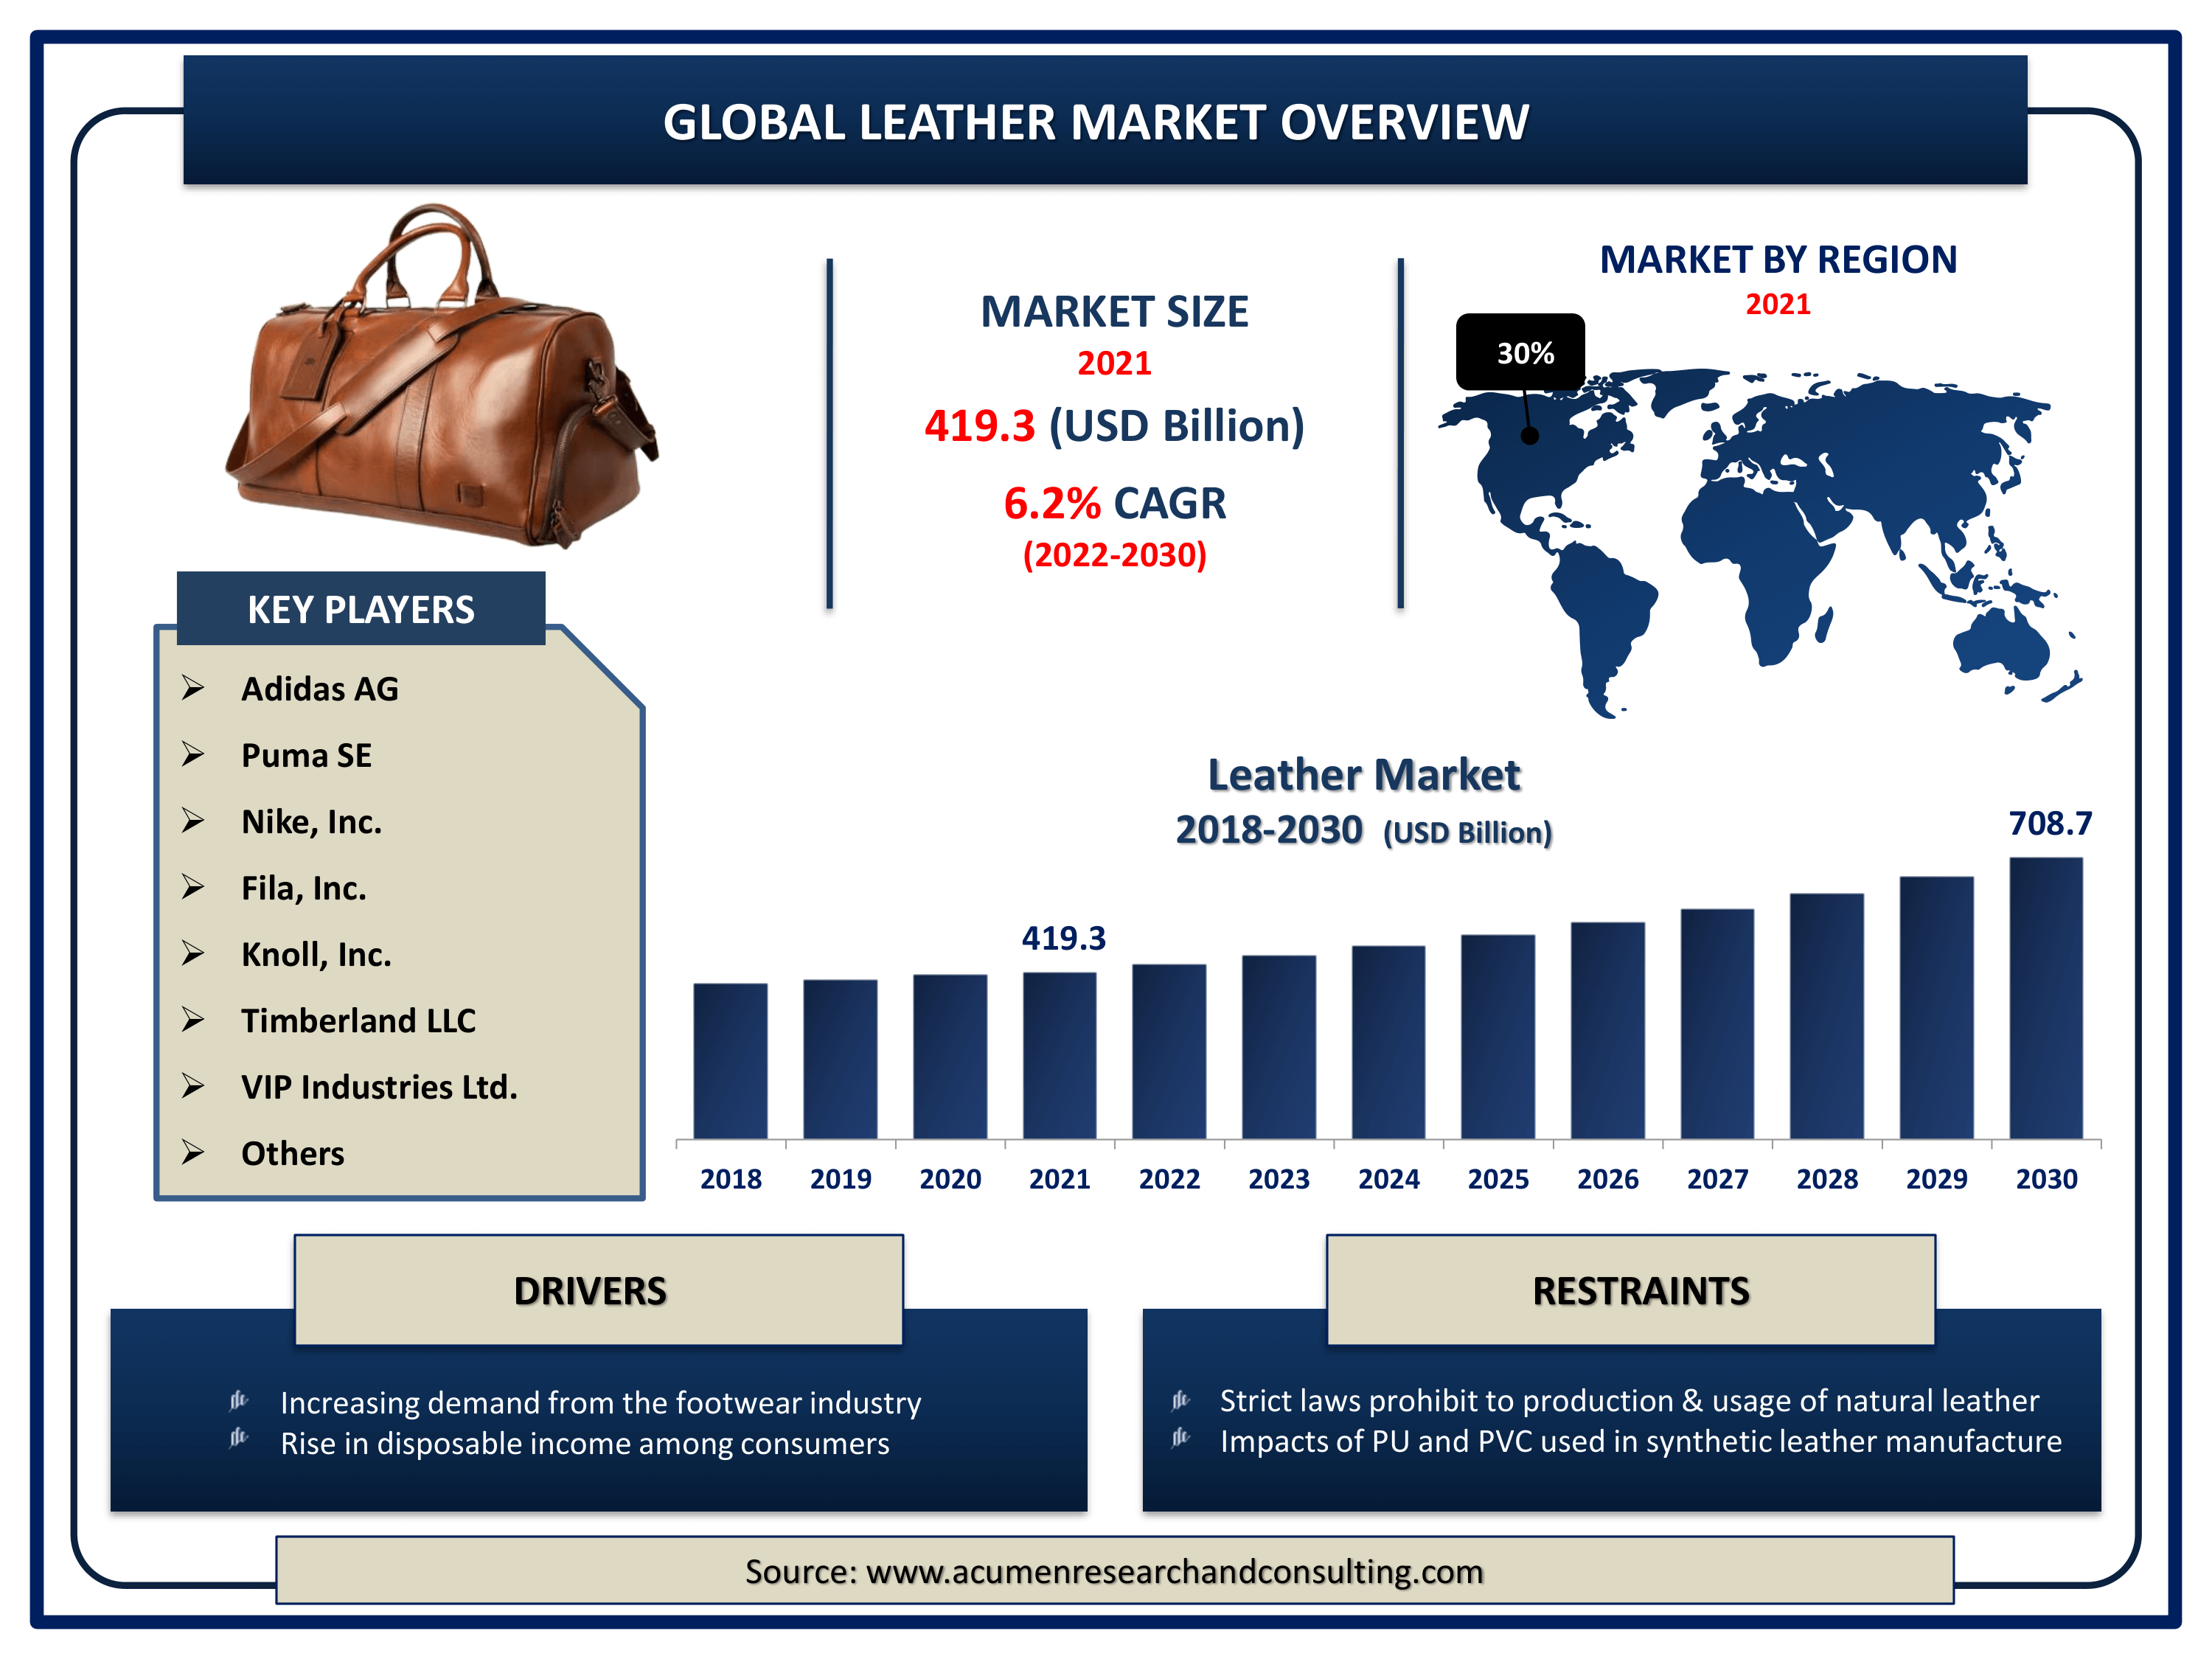 Leather Goods Market Size To Hit USD 735 Billion by 2032